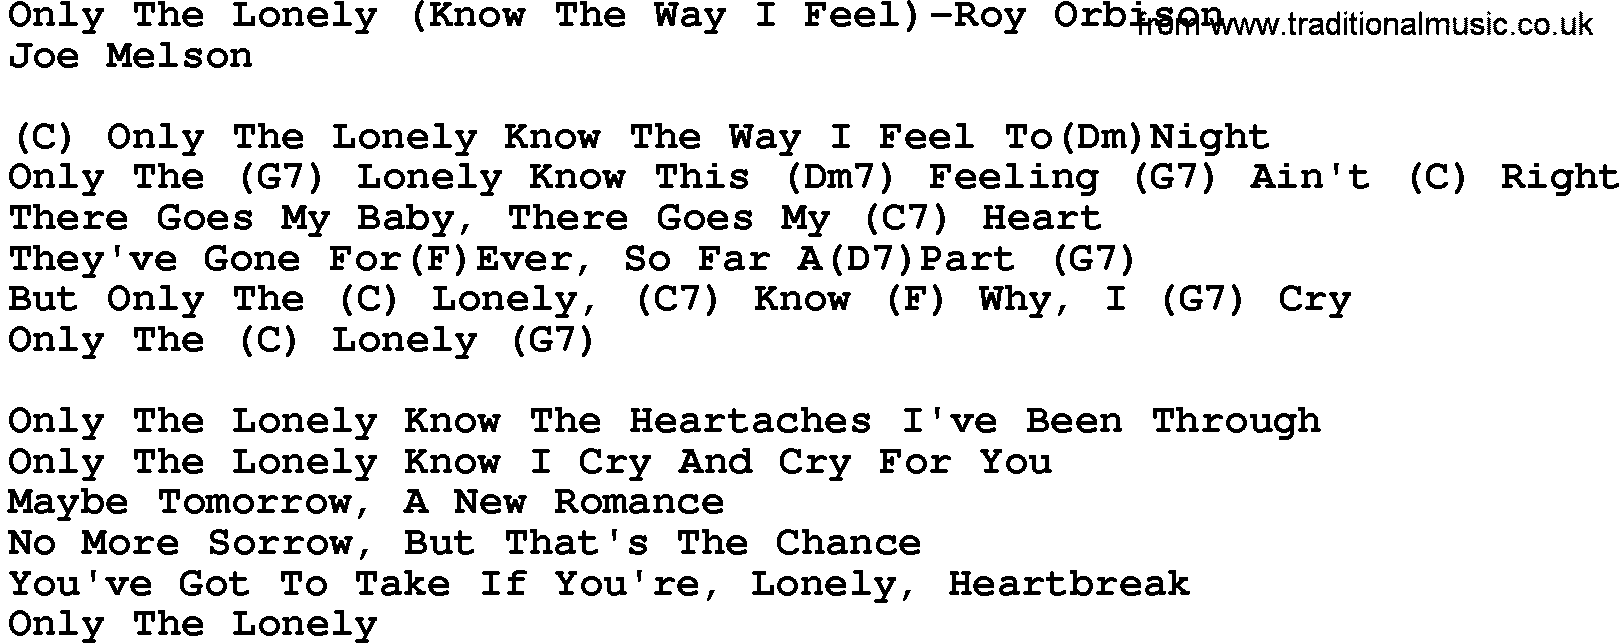 Country music song: Only The Lonely(Know The Way I Feel)-Roy Orbison lyrics and chords